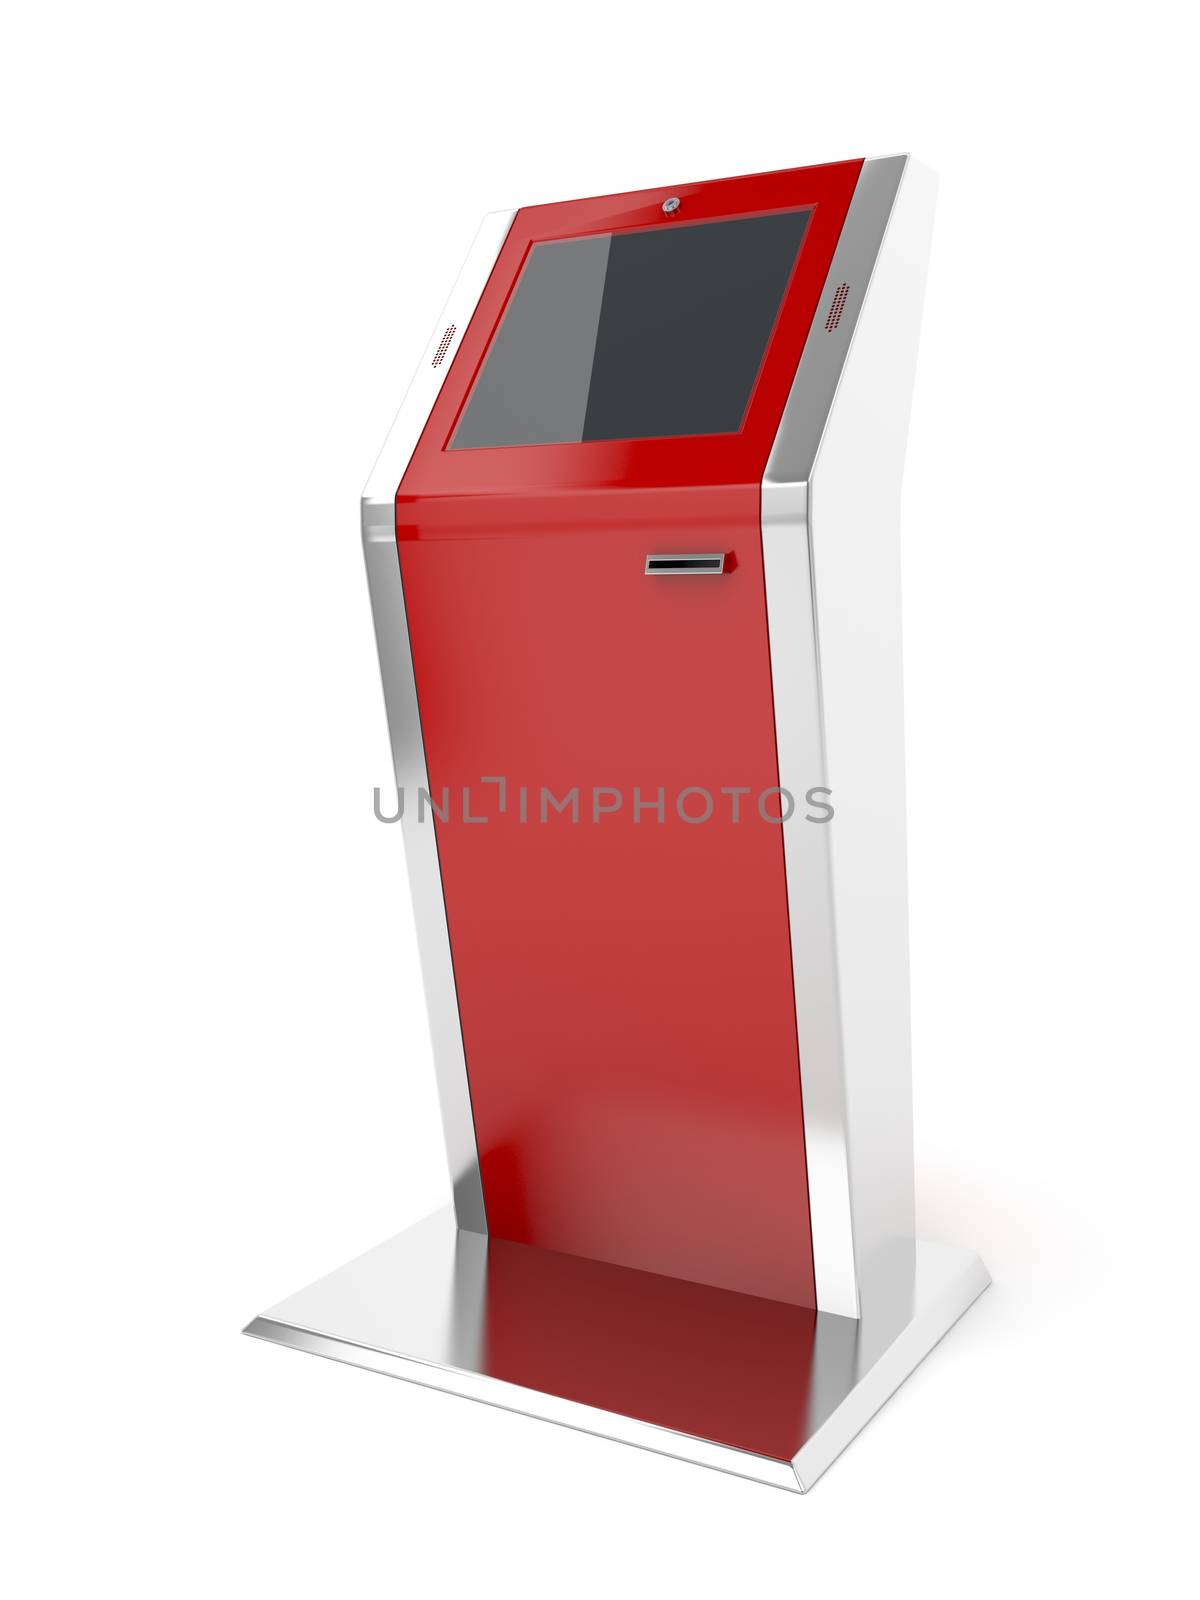 Interactive kiosk by magraphics